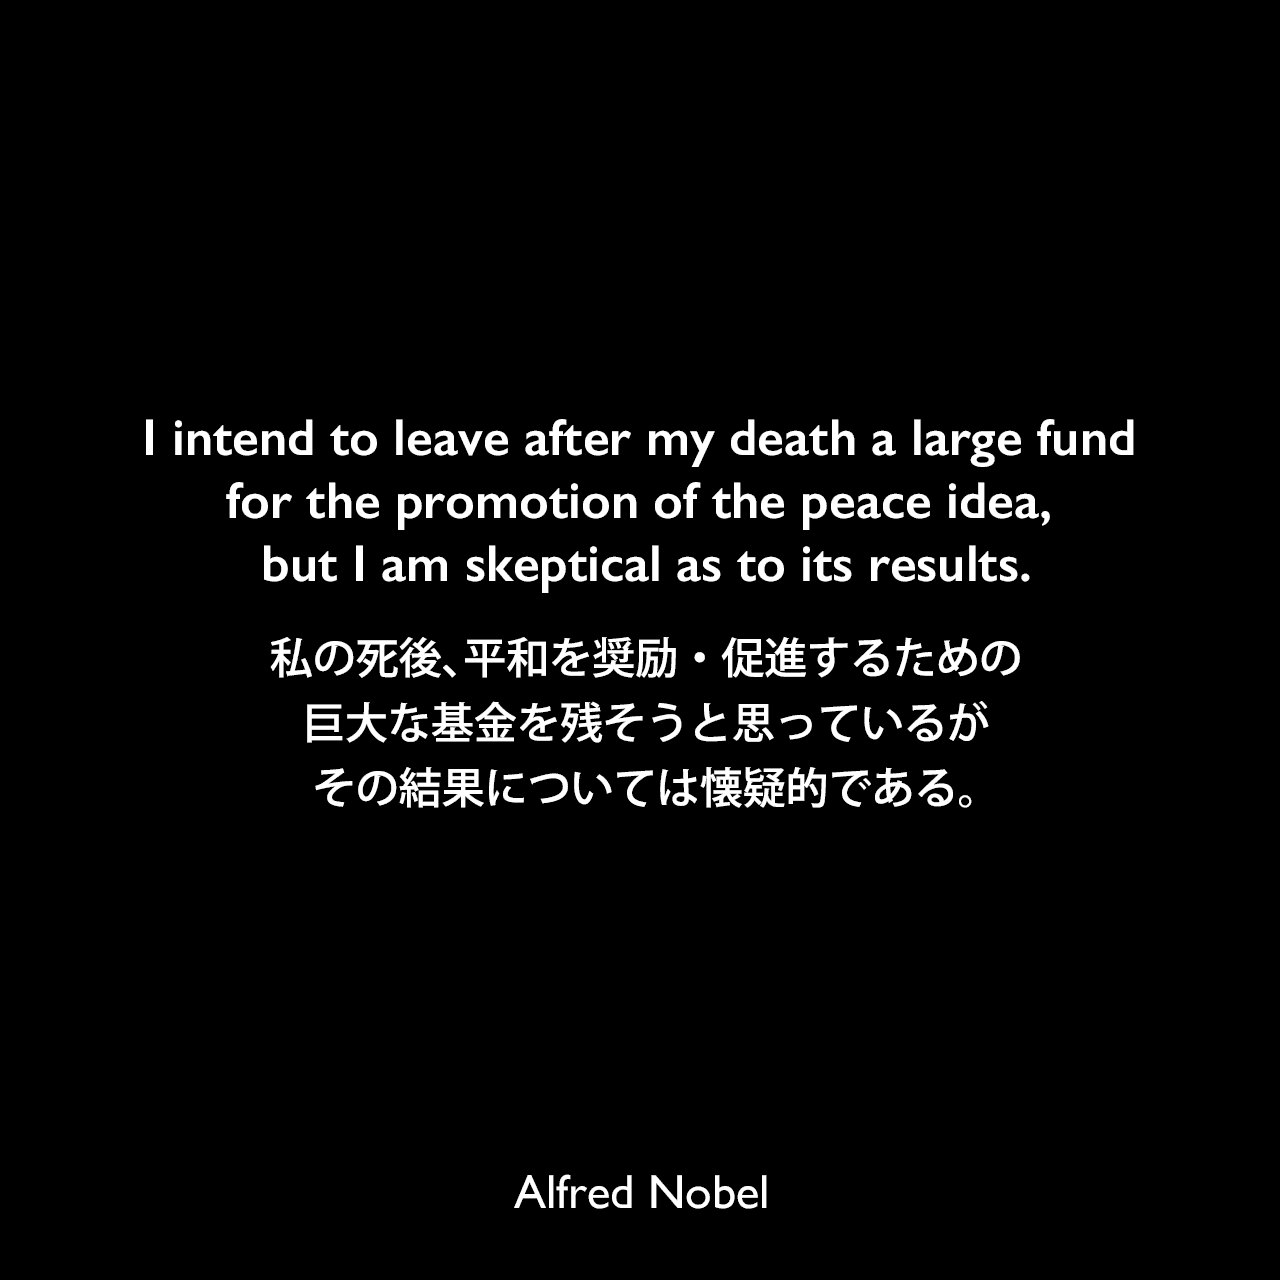 I intend to leave after my death a large fund for the promotion of the peace idea, but I am skeptical as to its results.私の死後、平和を奨励・促進するための巨大な基金を残そうと思っているが、その結果については懐疑的である。Alfred Nobel